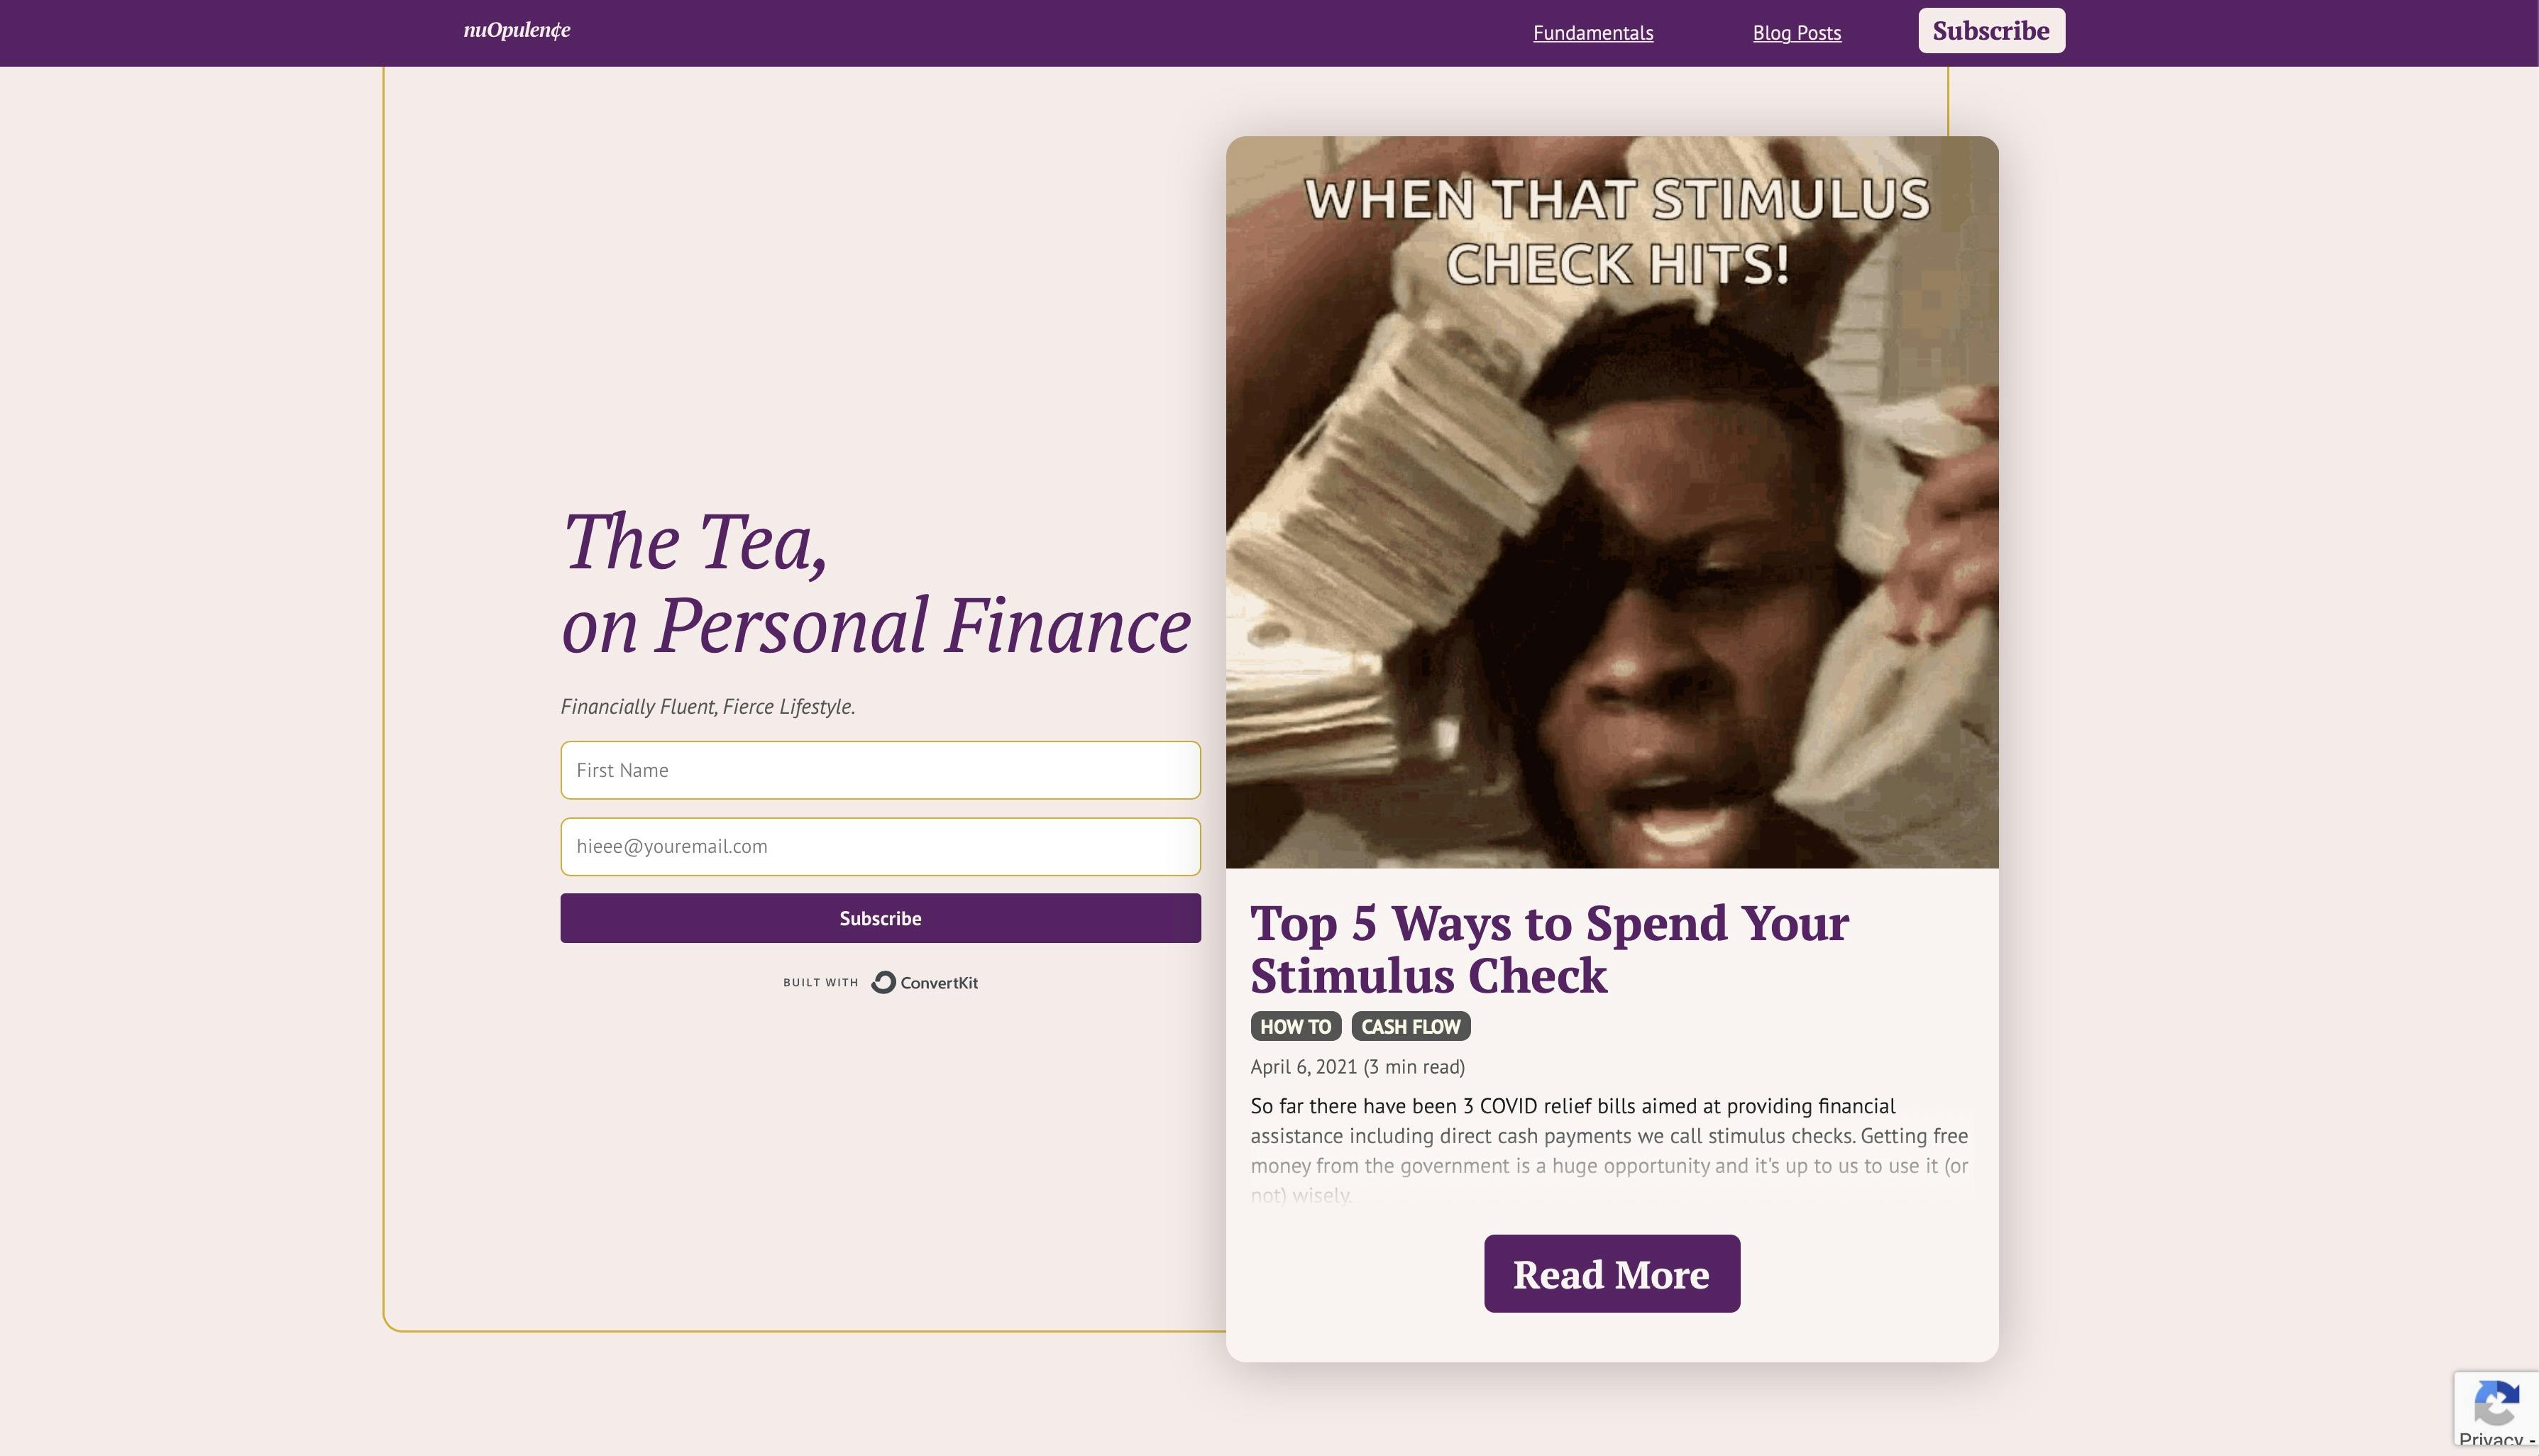 nuOpulence landing page: "The Tea On Personal Finance" with an email signup call to action and featured blog post.